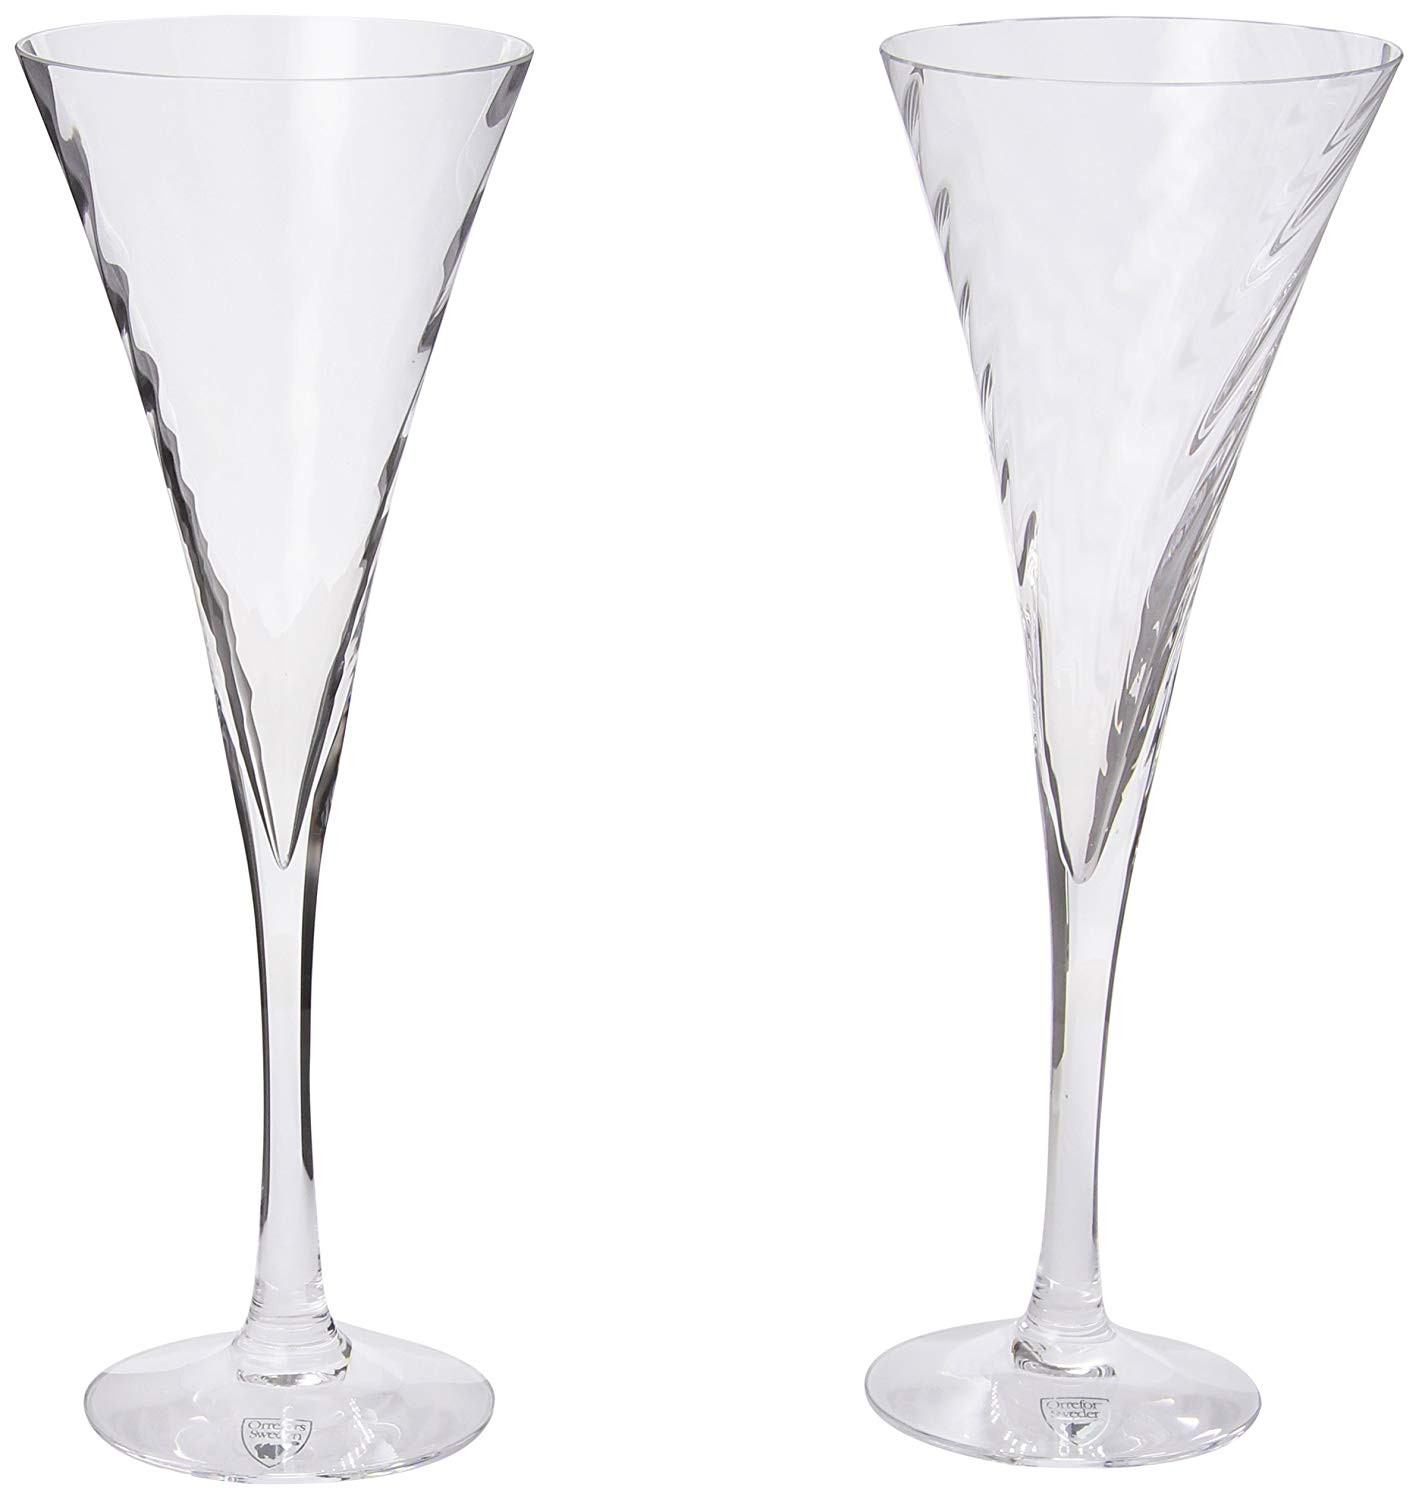 14 Cute Kosta Boda Red Rim Vase 2024 free download kosta boda red rim vase of amazon com orrefors helena 8 4 5 ounce flute set of 2 champagne throughout amazon com orrefors helena 8 4 5 ounce flute set of 2 champagne flutes mixed drinkware s